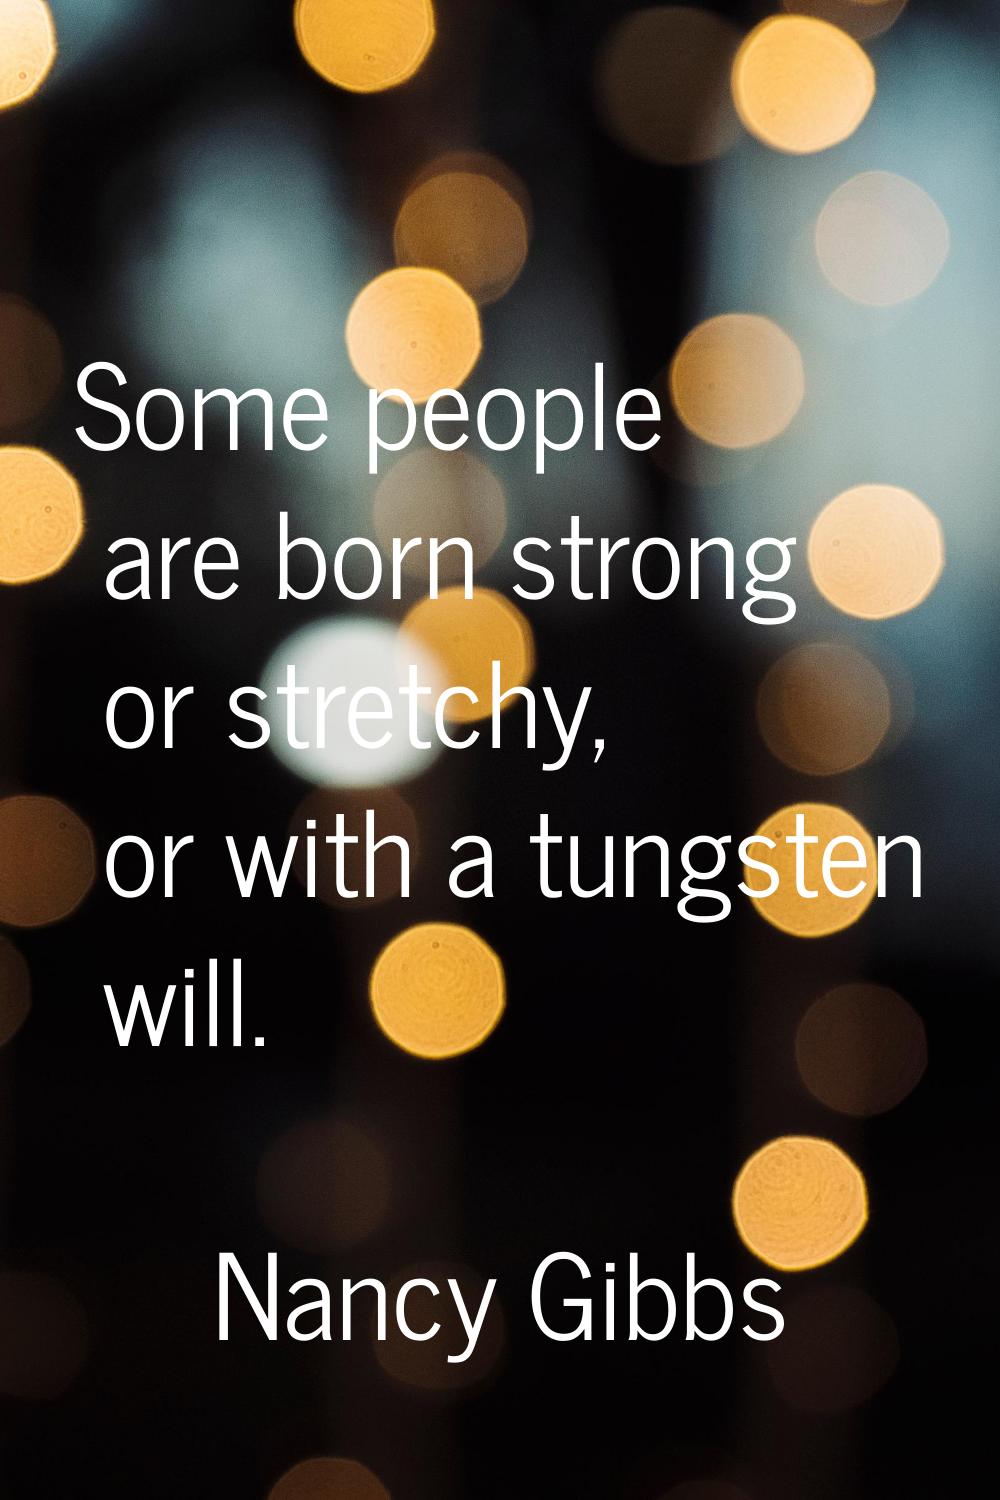 Some people are born strong or stretchy, or with a tungsten will.